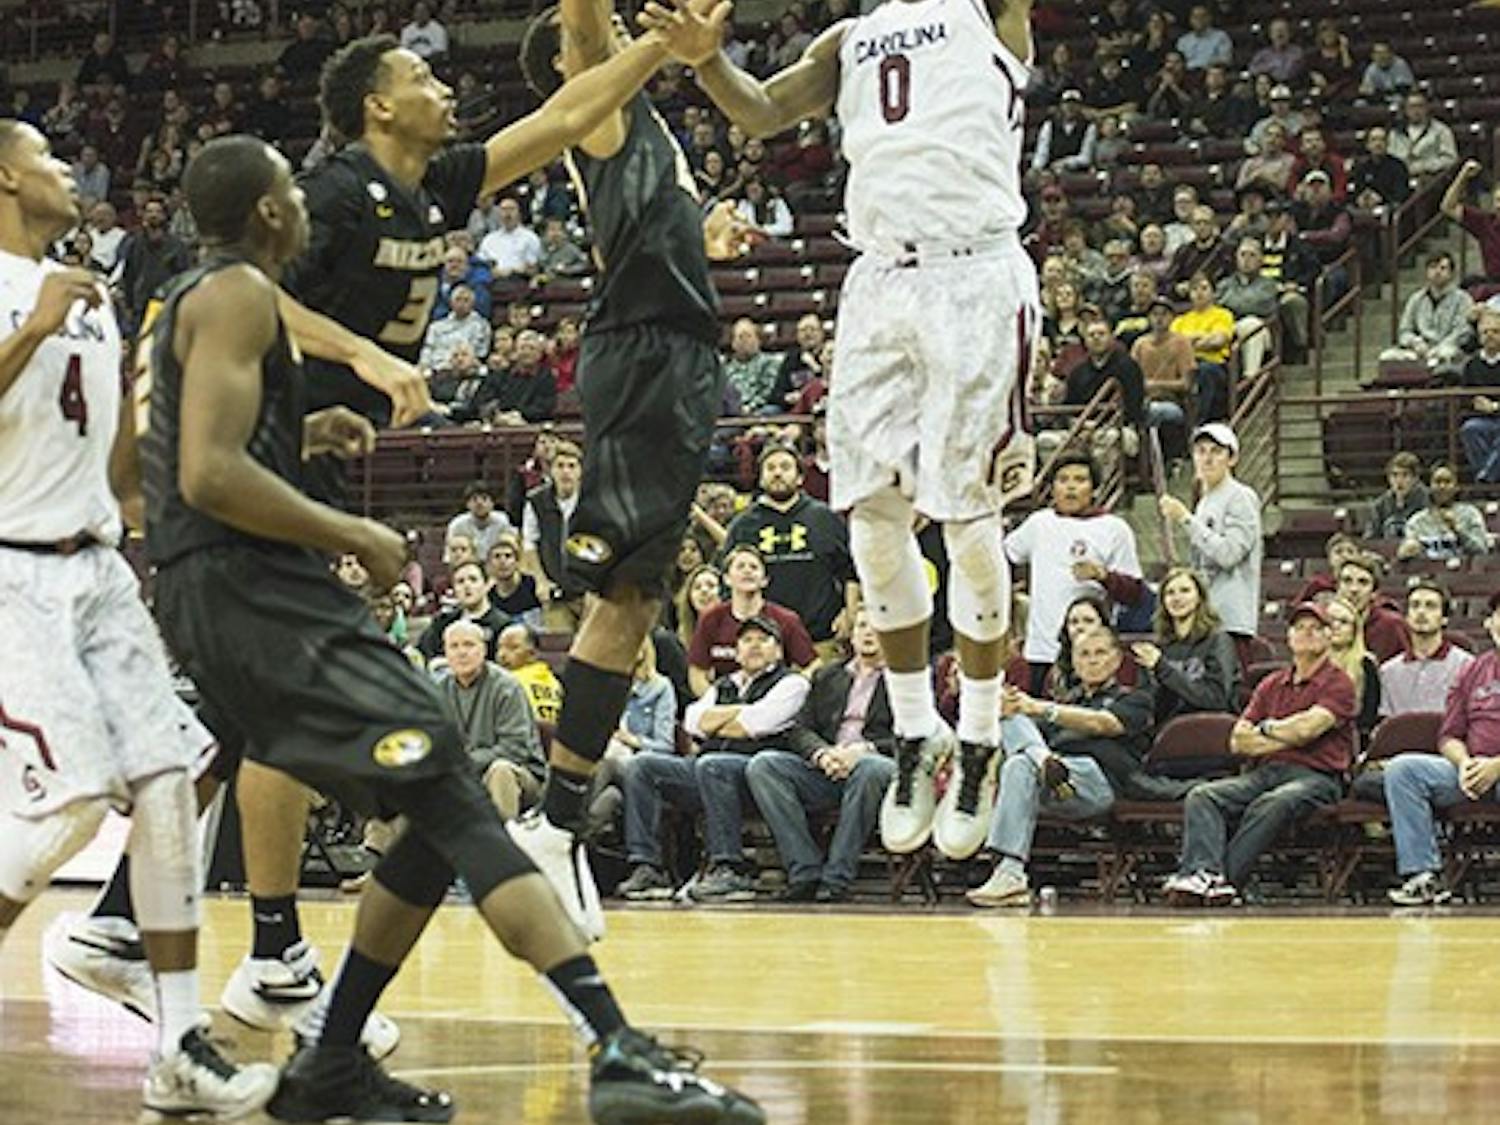 South Carolina will face Missouri in the first round of the 2015 SEC tournament on Wednesday, March 11. South Carolina defeated Missouri 65-60 on February 10 behind a 14-point performance from sophomore guard Sindarius Thornwell. 